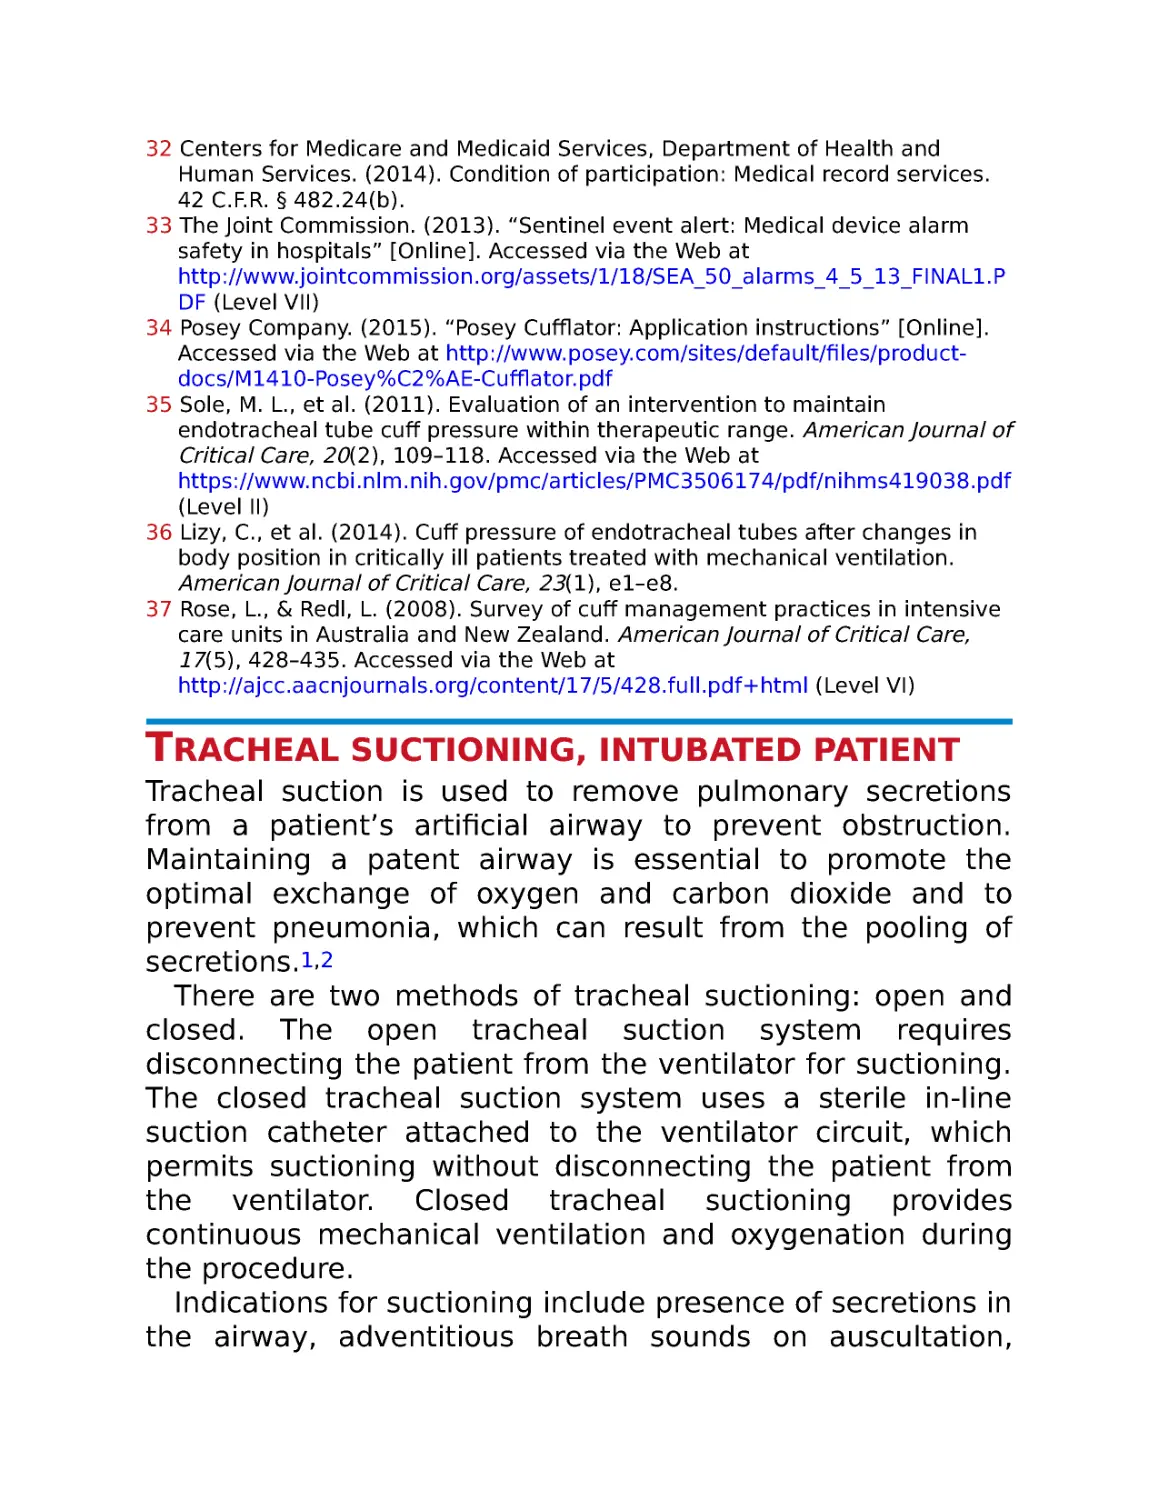 Tracheal suctioning, intubated patient